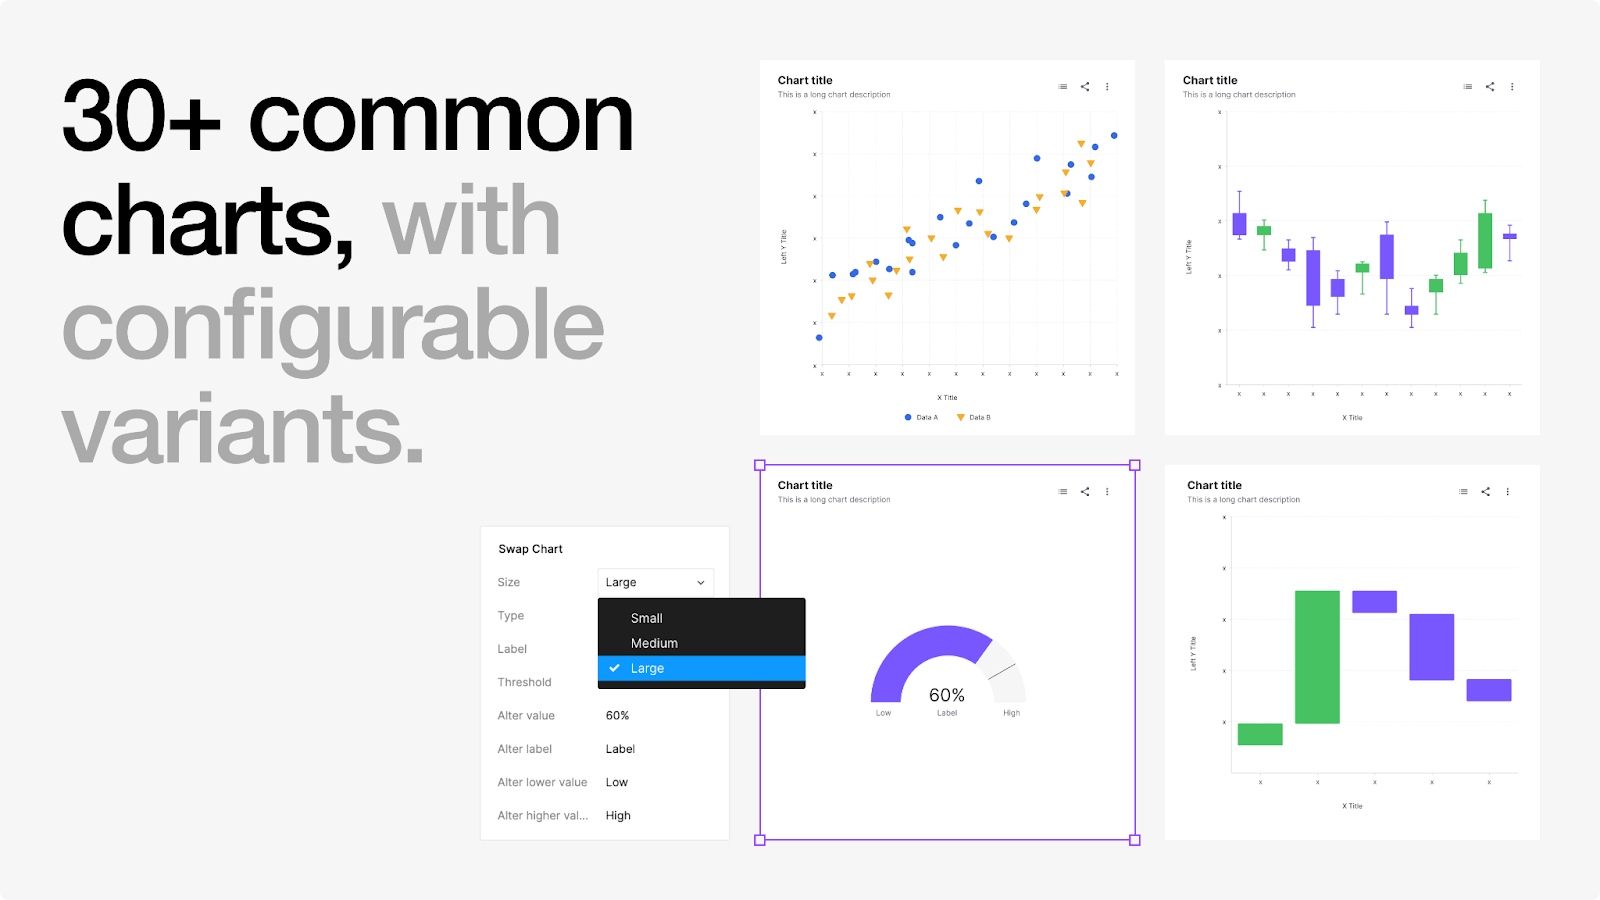 Image from the Advanced Data Visualization in Figma: Transforming Data Design article on Abduzeedo